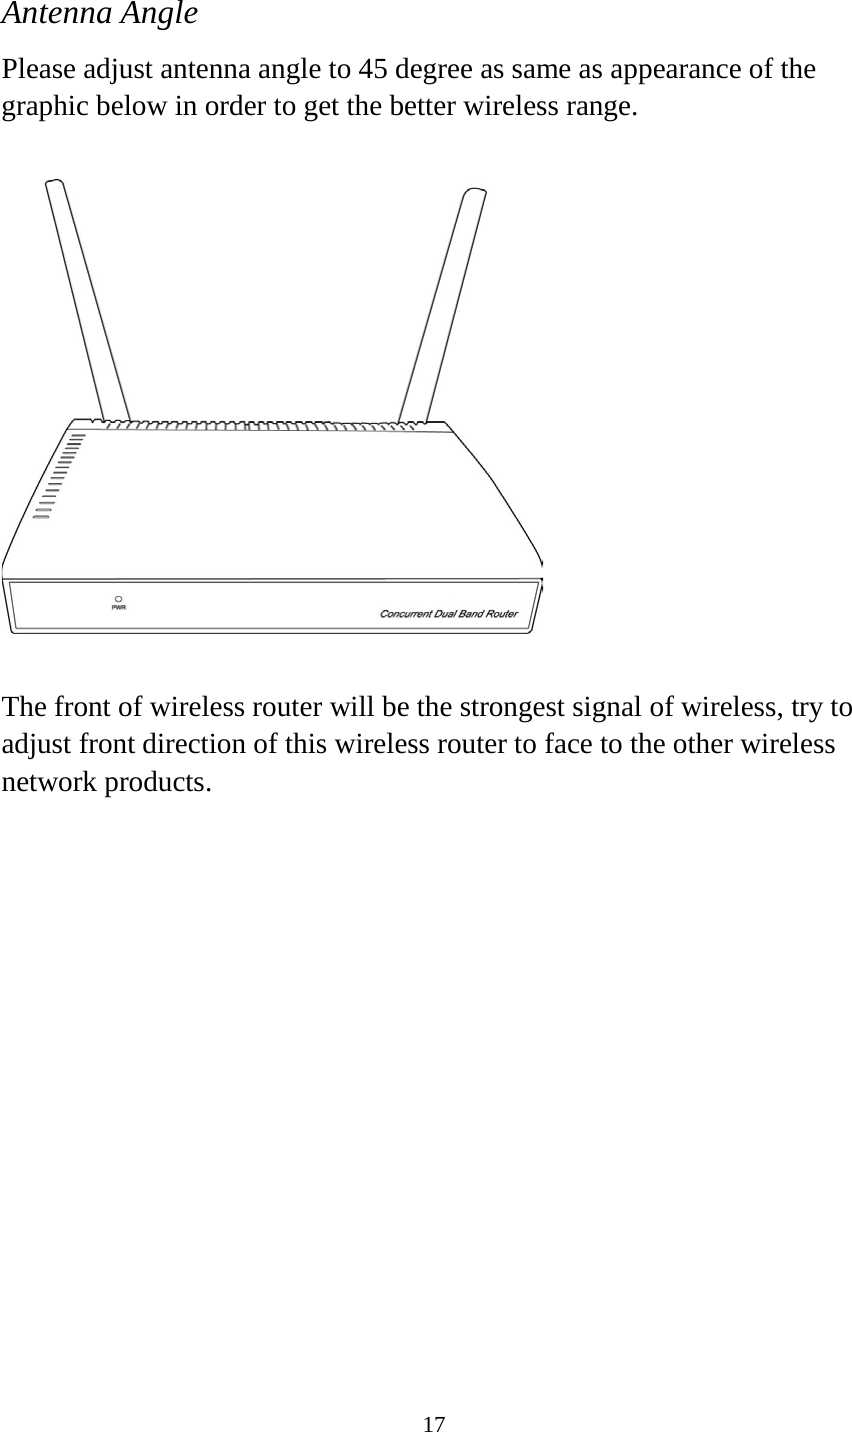 17  Antenna Angle Please adjust antenna angle to 45 degree as same as appearance of the graphic below in order to get the better wireless range.    The front of wireless router will be the strongest signal of wireless, try to adjust front direction of this wireless router to face to the other wireless network products.   